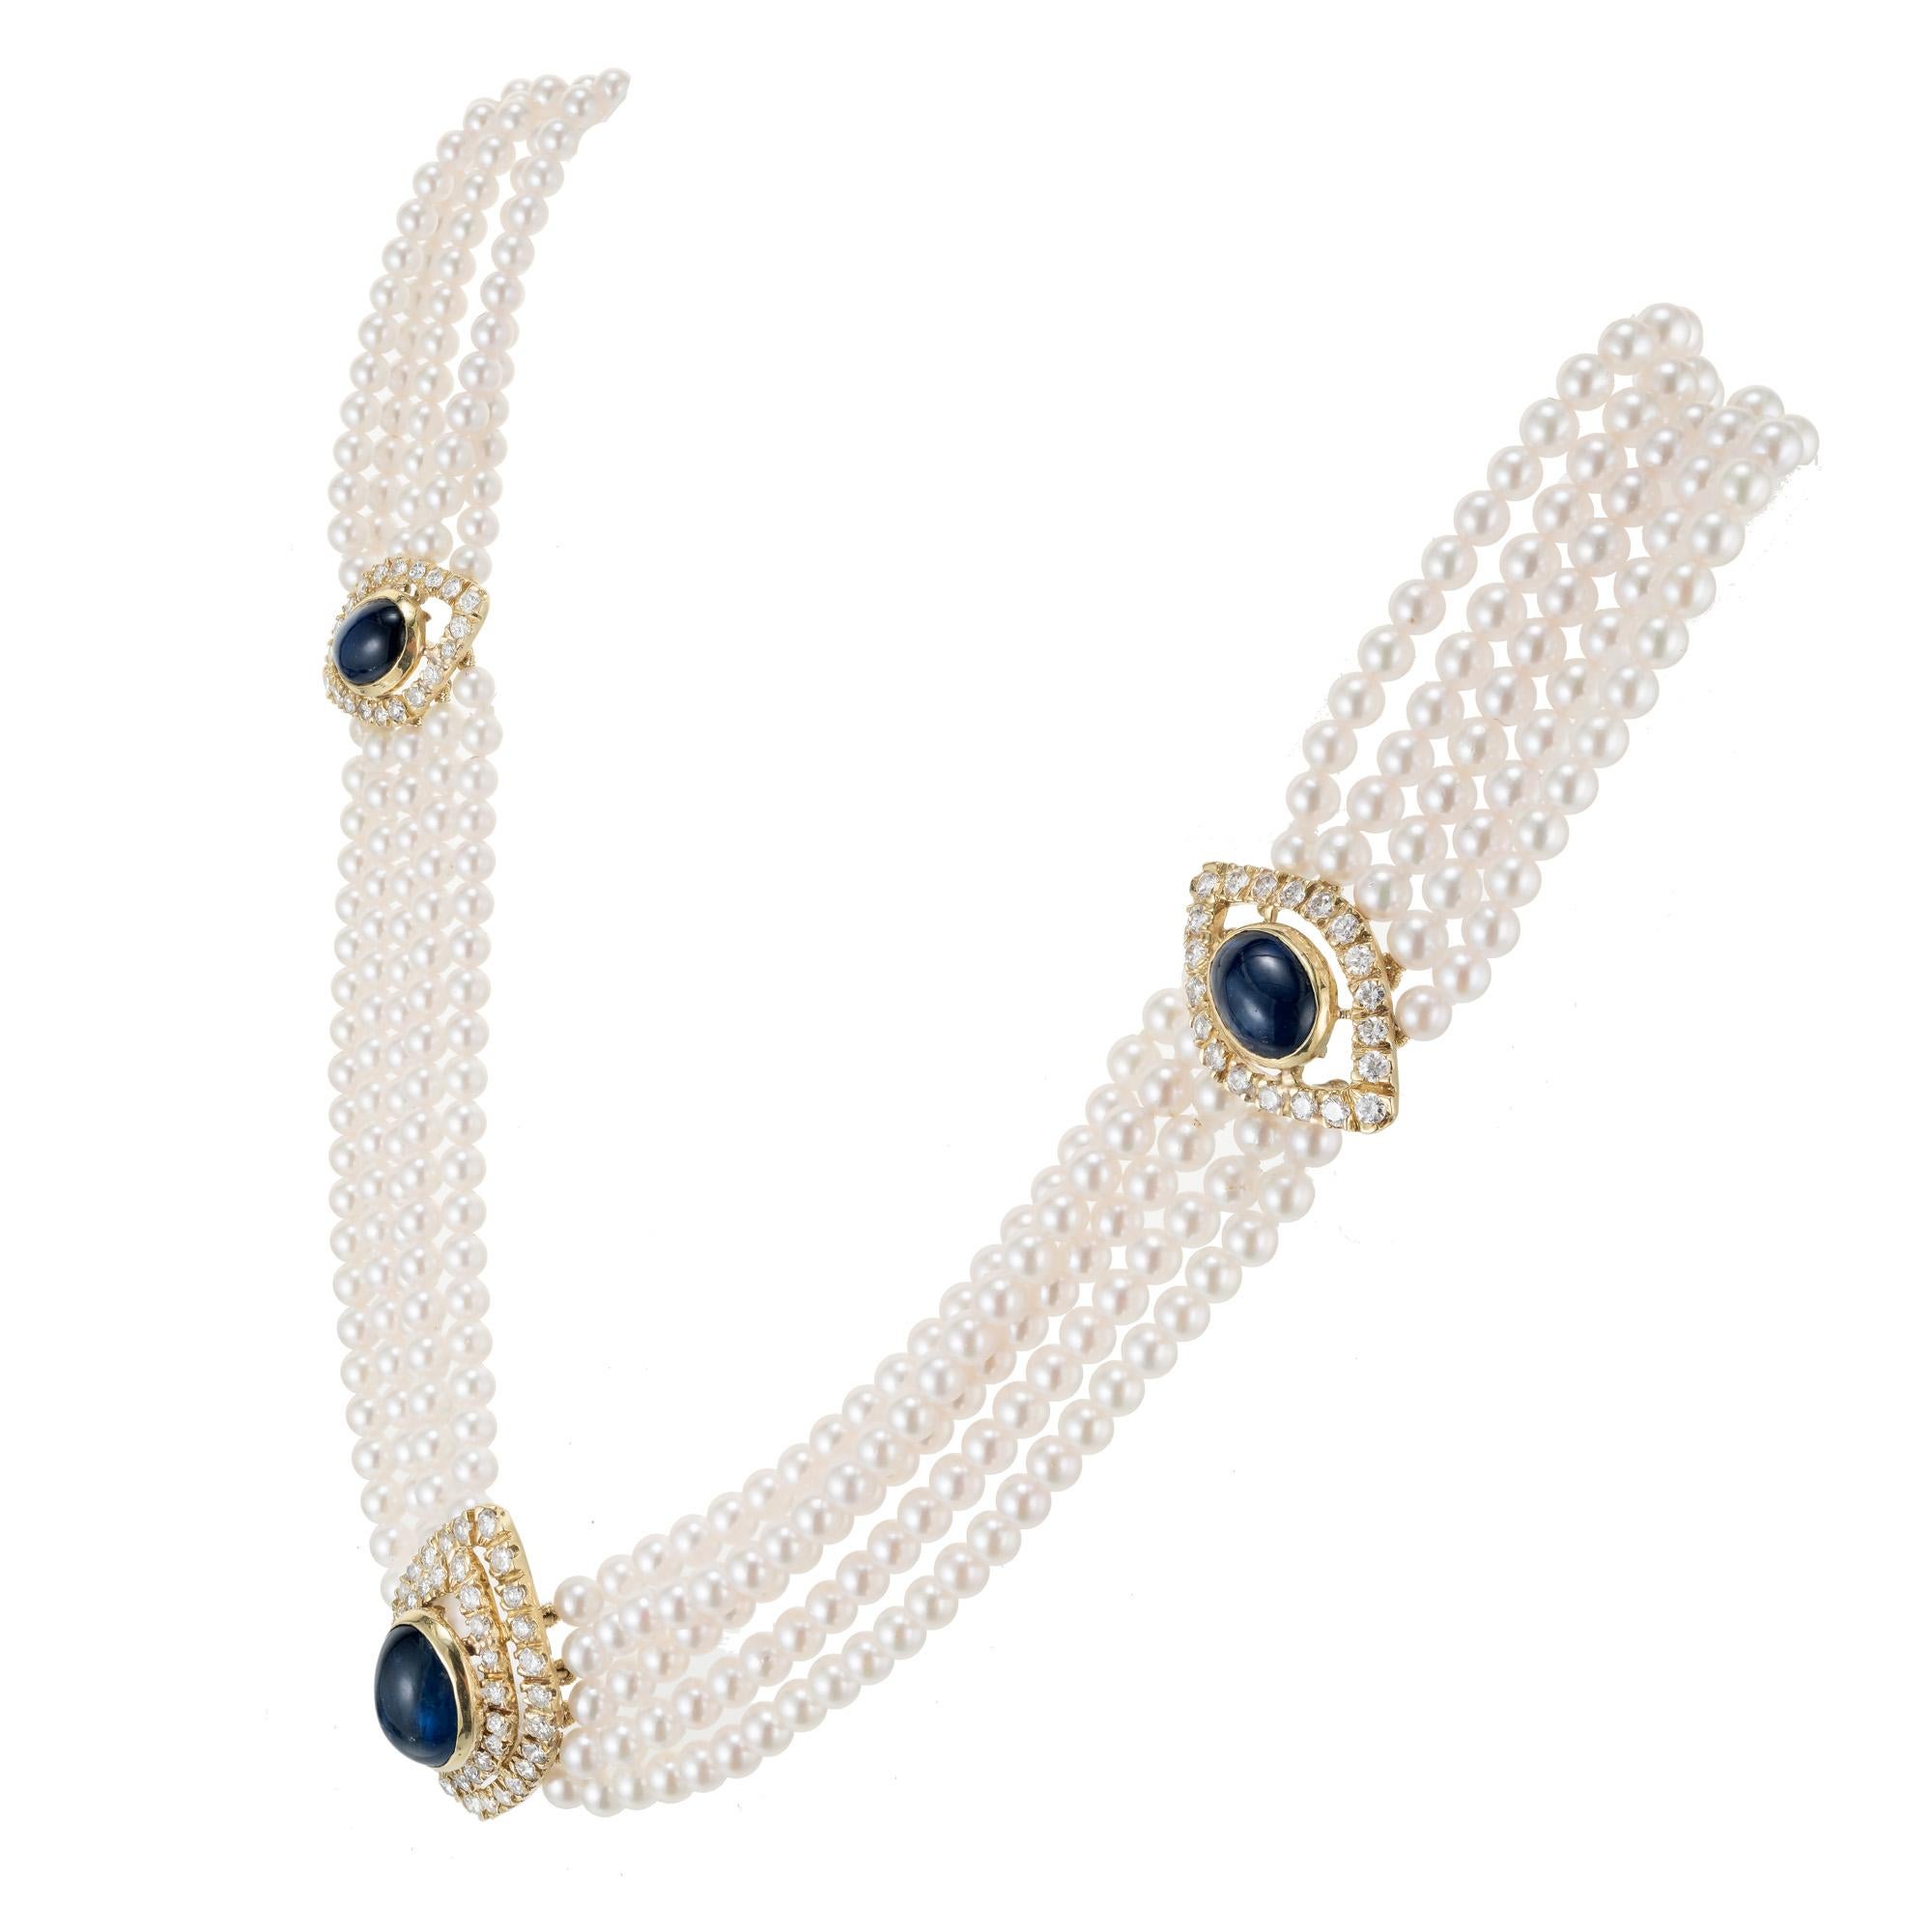 Uniquely crafted five strand Japanese cultured pearl and sapphire 18k yellow gold necklace. 4 oval cabochon sapphires, each with a halo of round cut diamonds, connected with 5 strands of cultured pearls. 17 inches long. GIA certified.  

1 cabochon